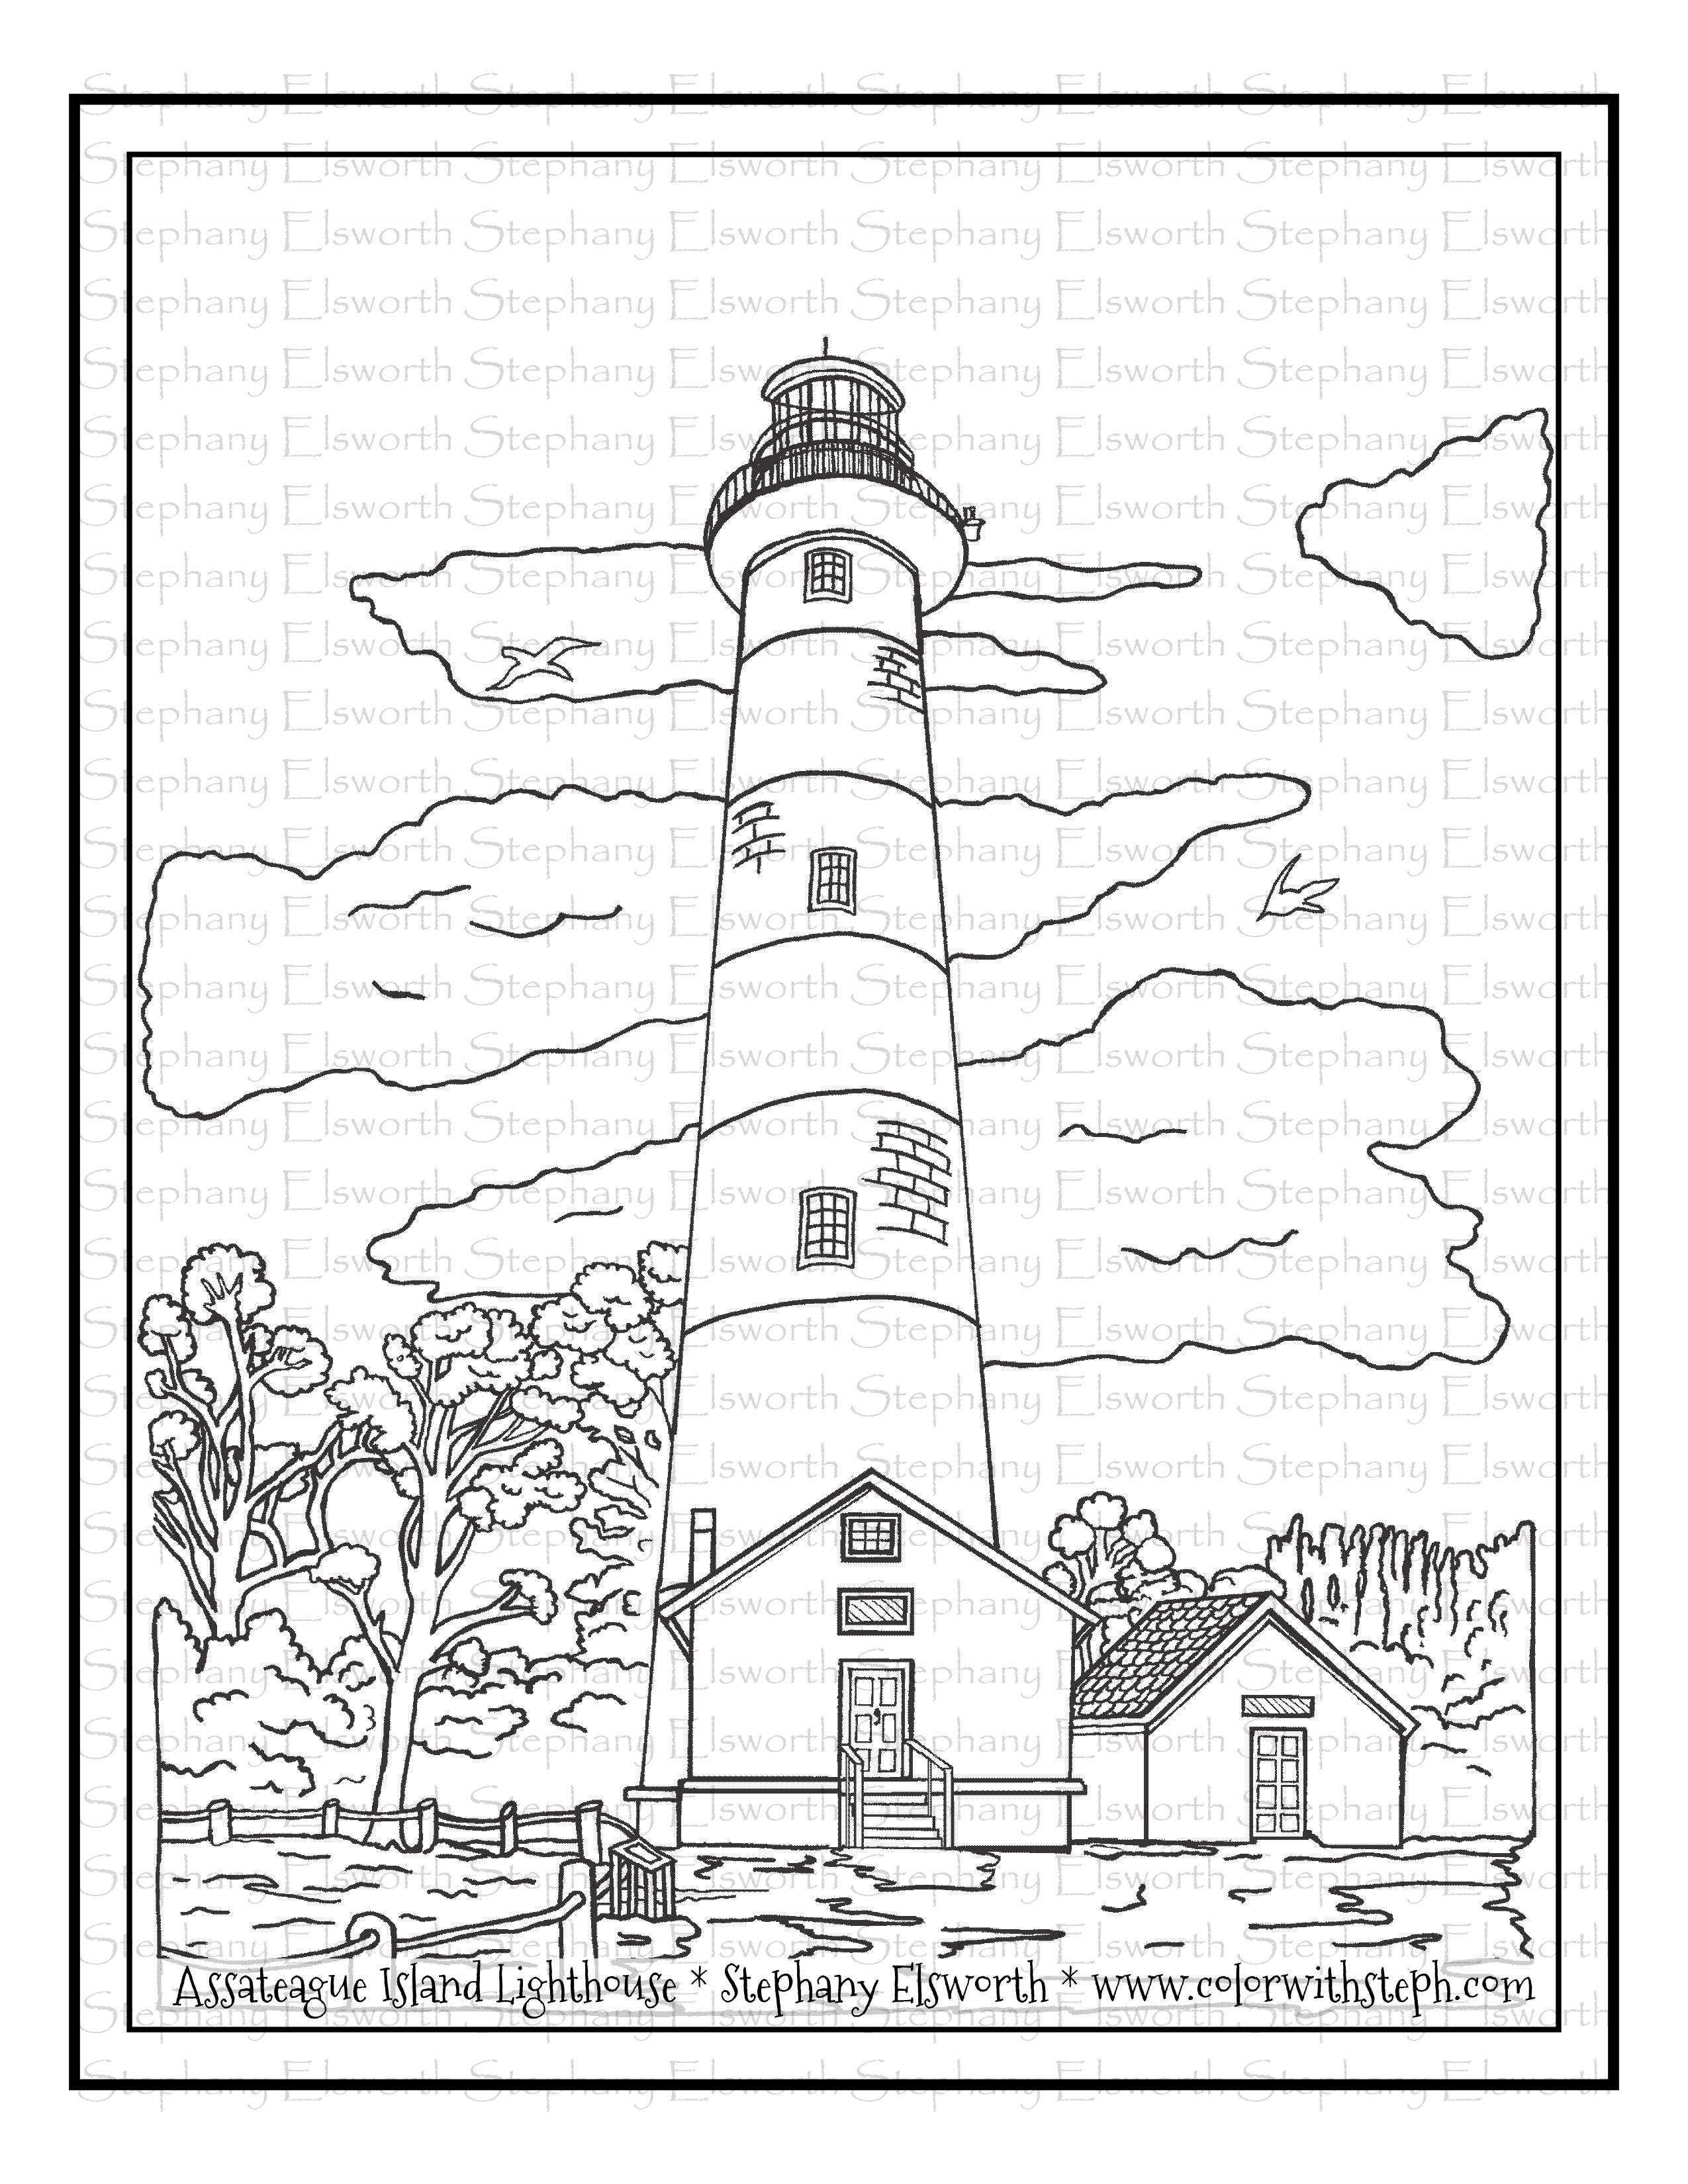 Assateague Island Lighthouse Free Coloring Page With Steph - Coloring Home